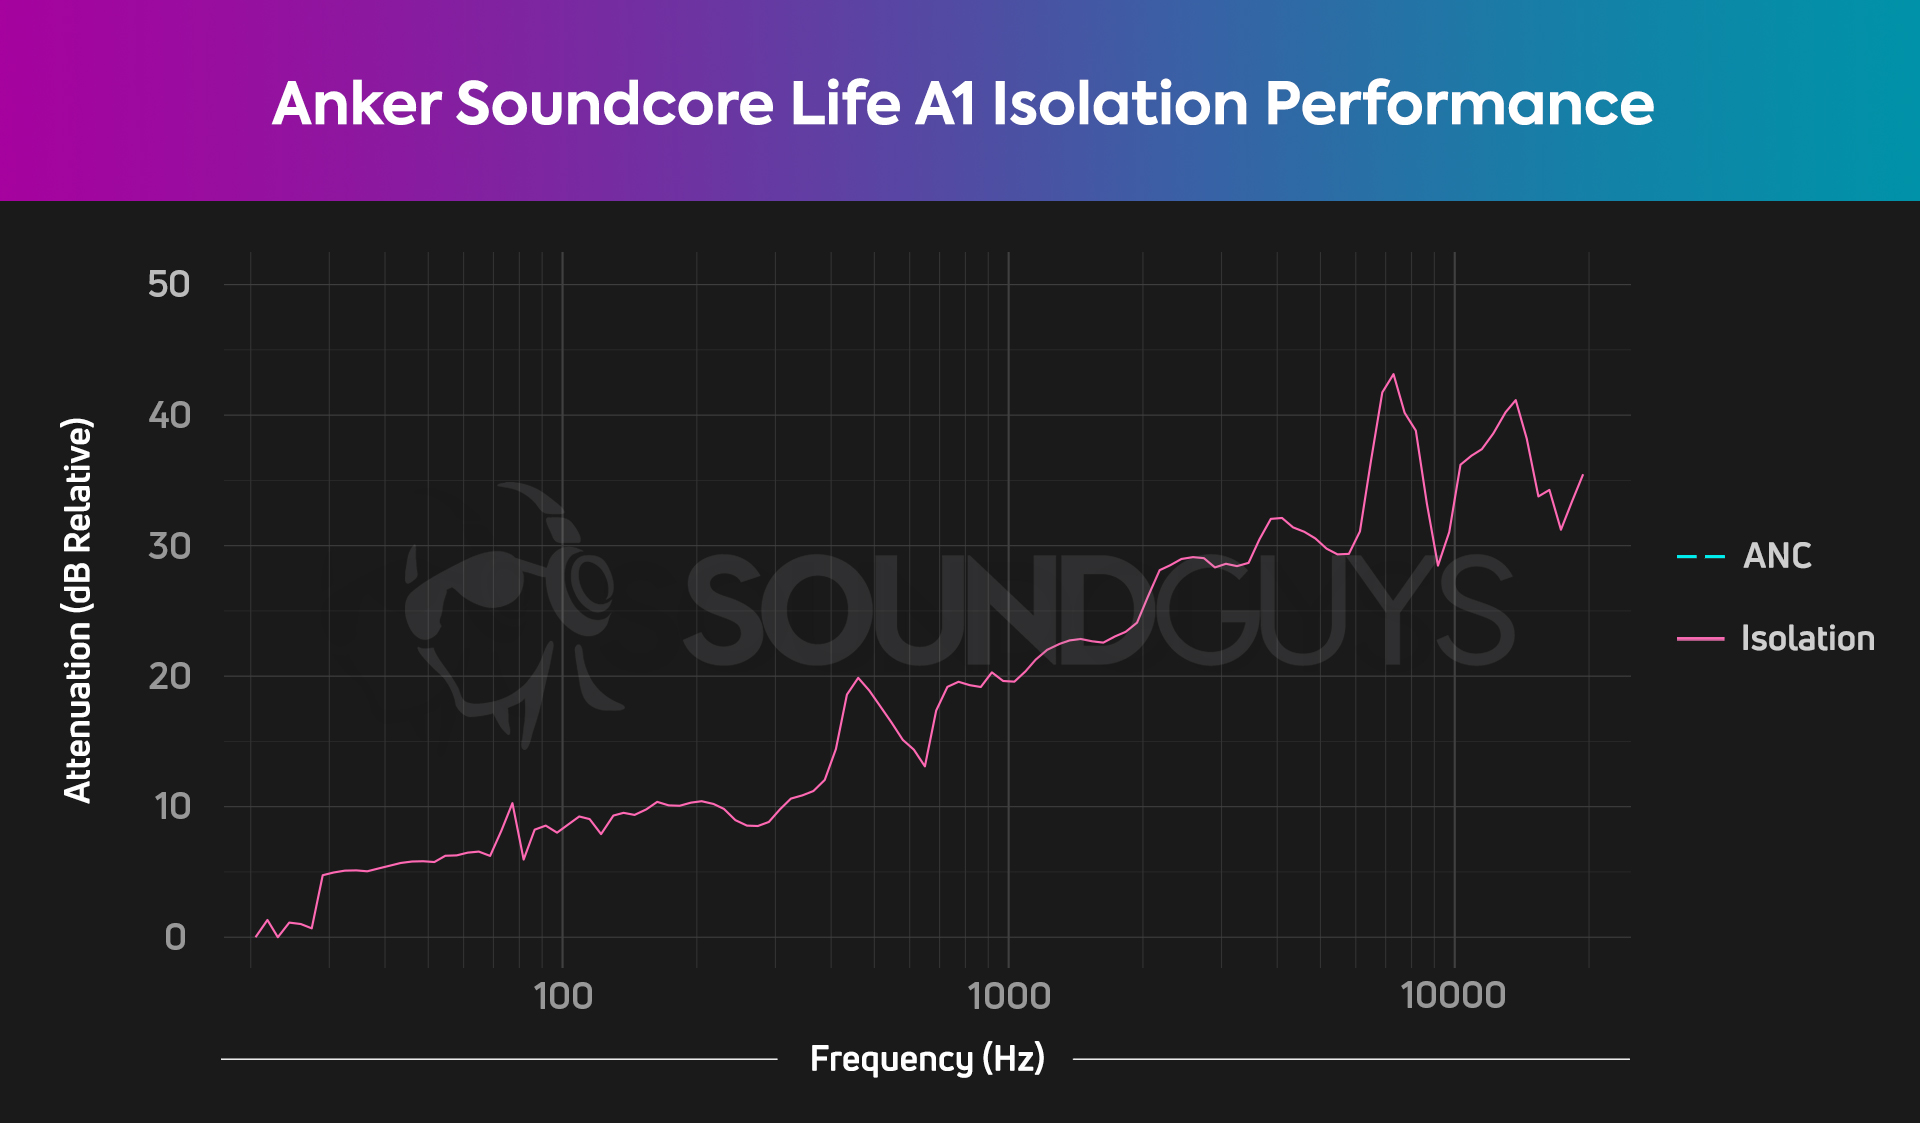 This chart shows the Anker Soundcore Life A1 isolation performance.